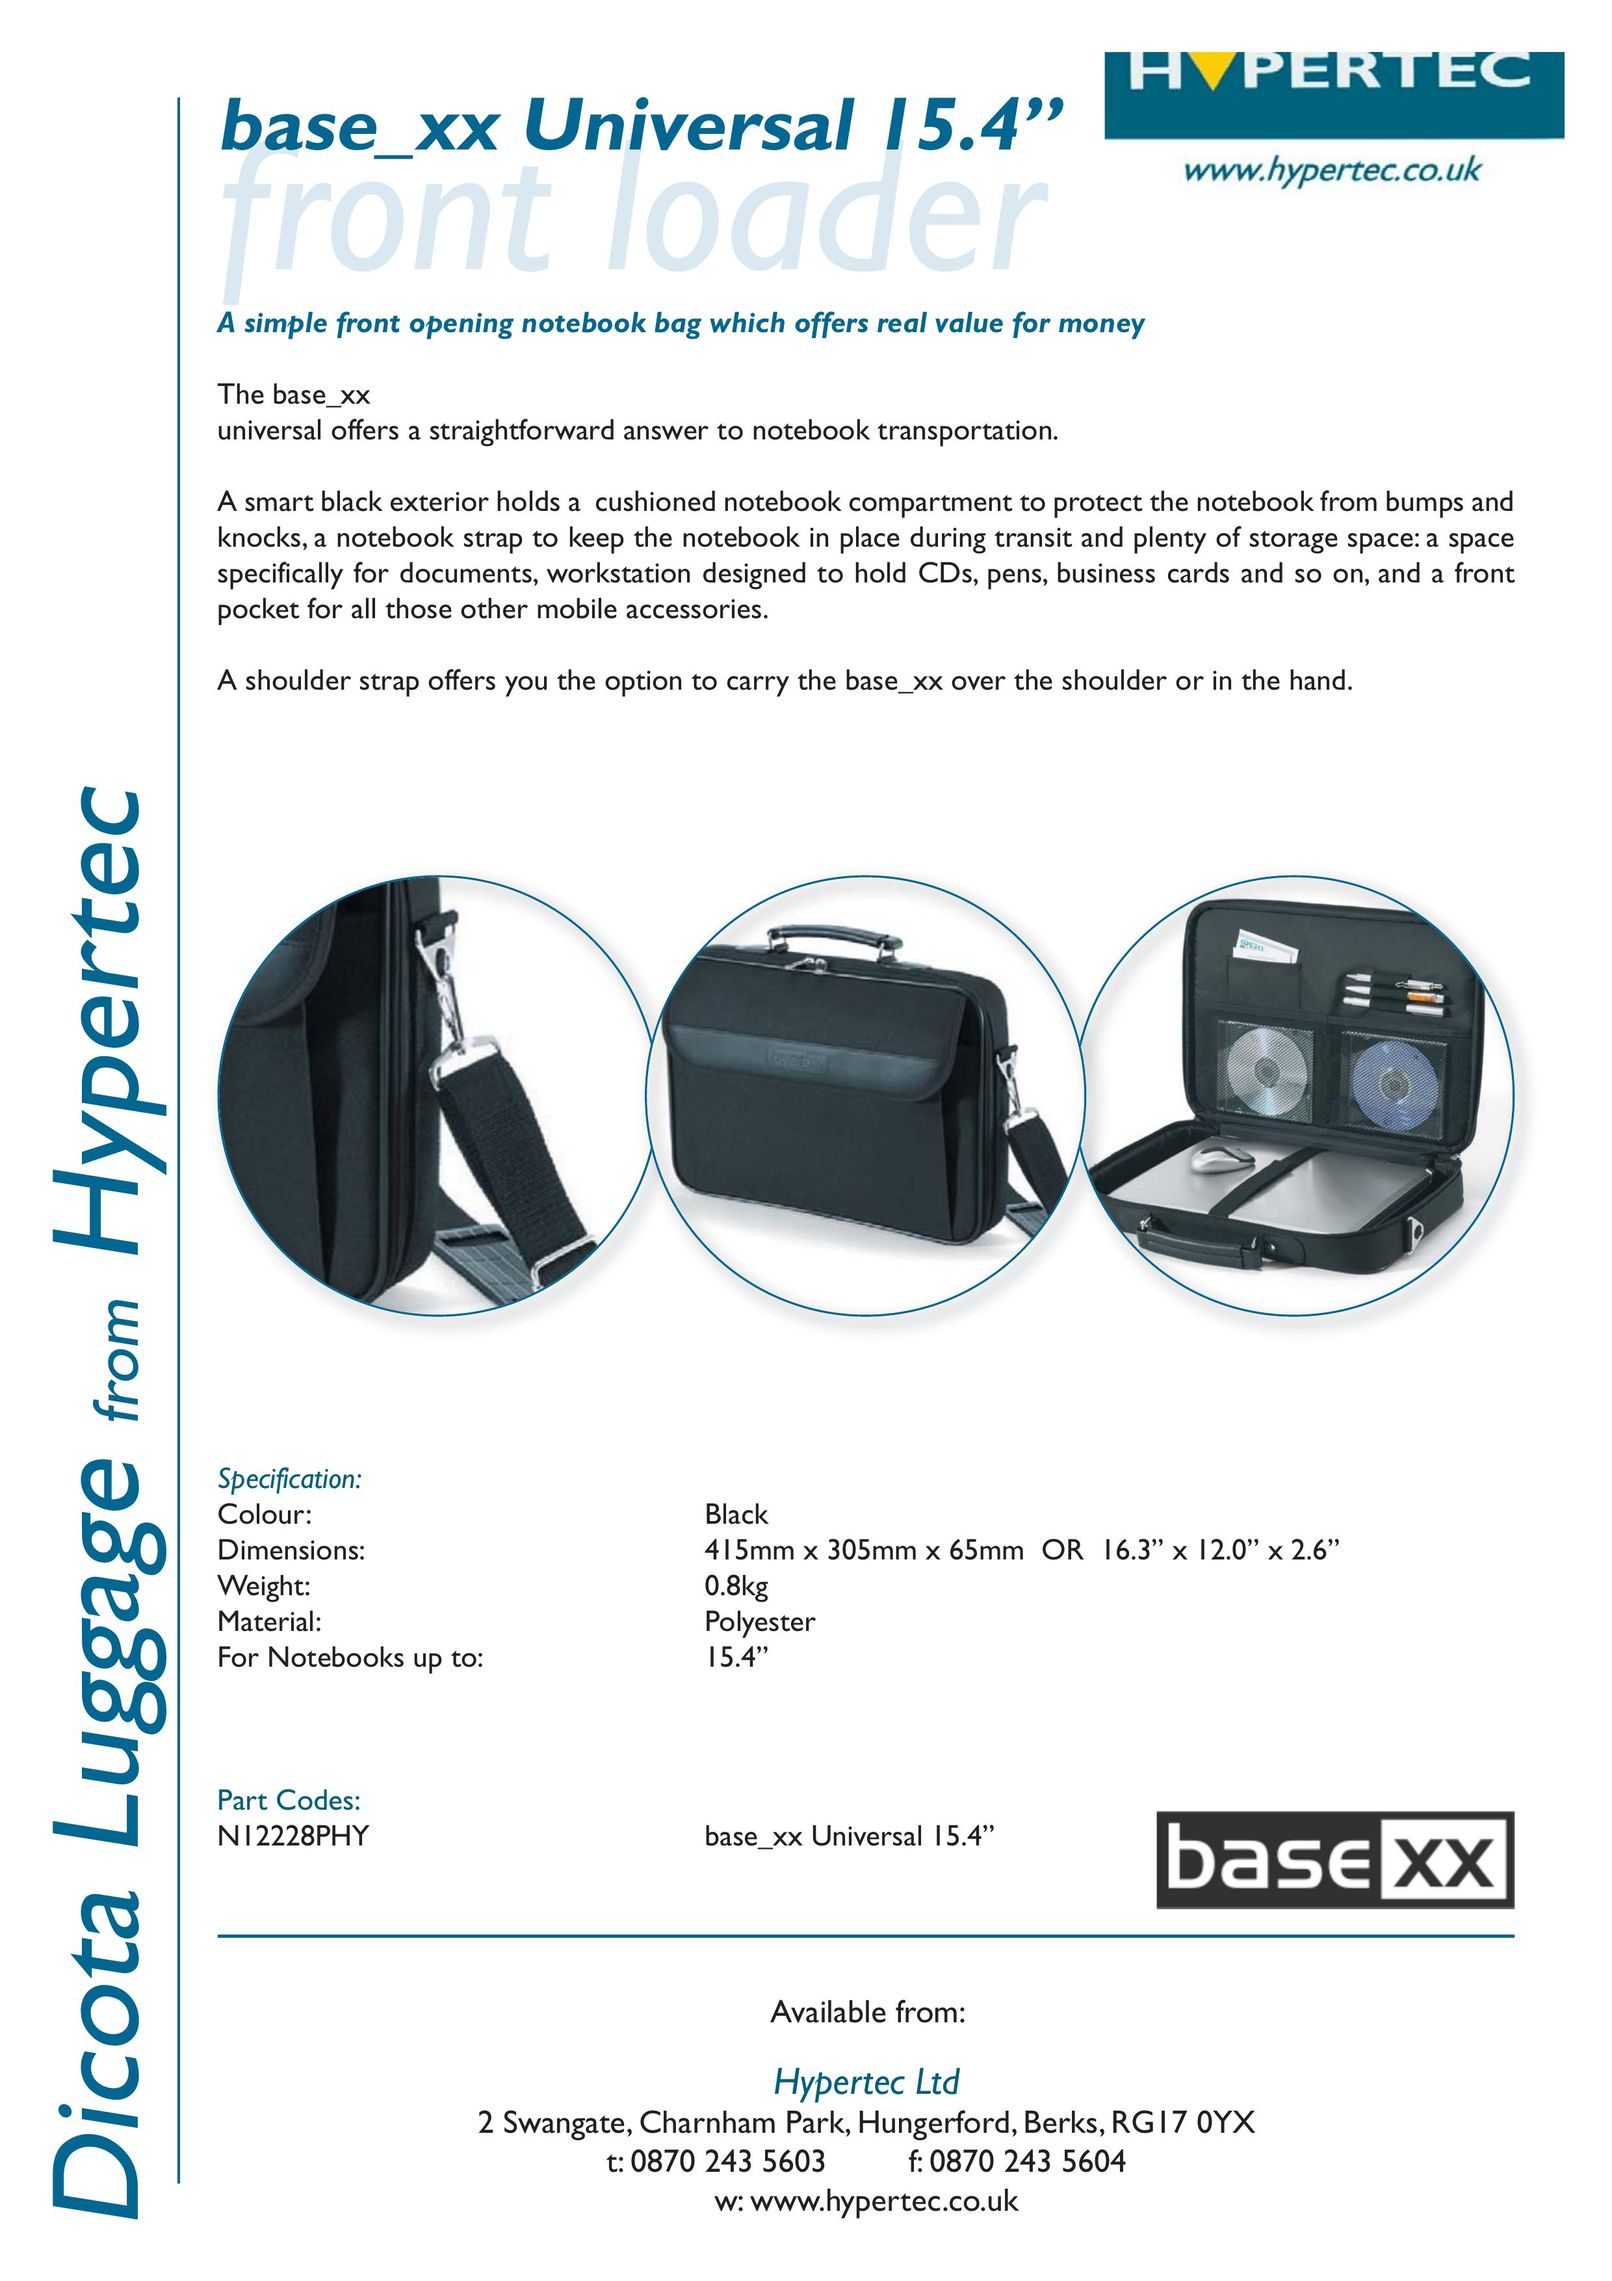 Hypertec N12228PHY Carrying Case User Manual